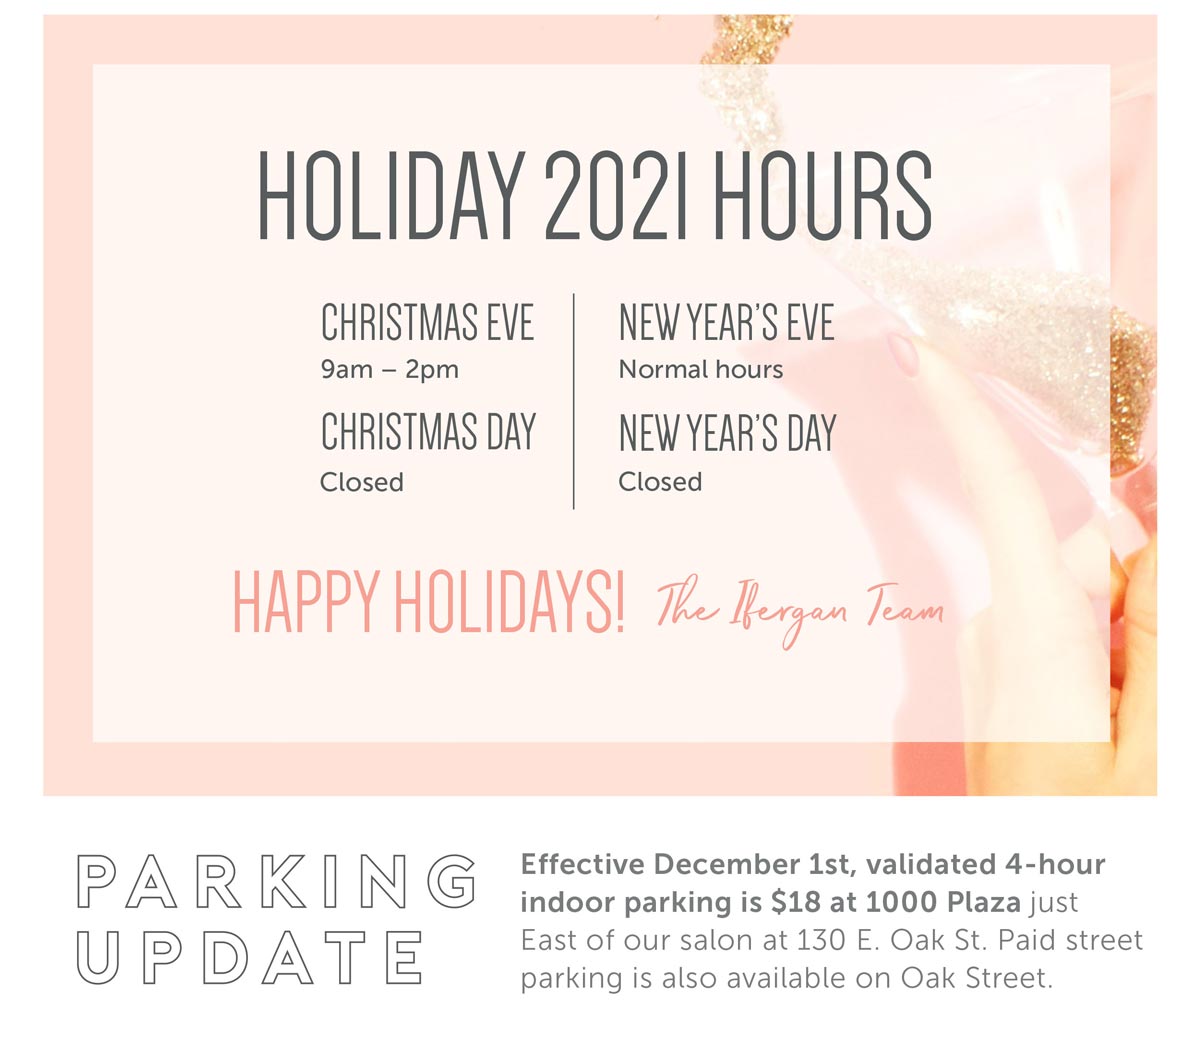 Holiday 2021 Hours: Christmas Eve 9a-2p, Christmas Day Closed, New Year's Eve Normal hours, New Year's Day Closed. Happy Holidays! The Ifergan team. Parking Update: Effective December 1st, validated 4-hour indoor parking is $18 at 1000 Plaza, just East of our salon at 130 E. Oak St. Paid street parking is also available on Oak Street.